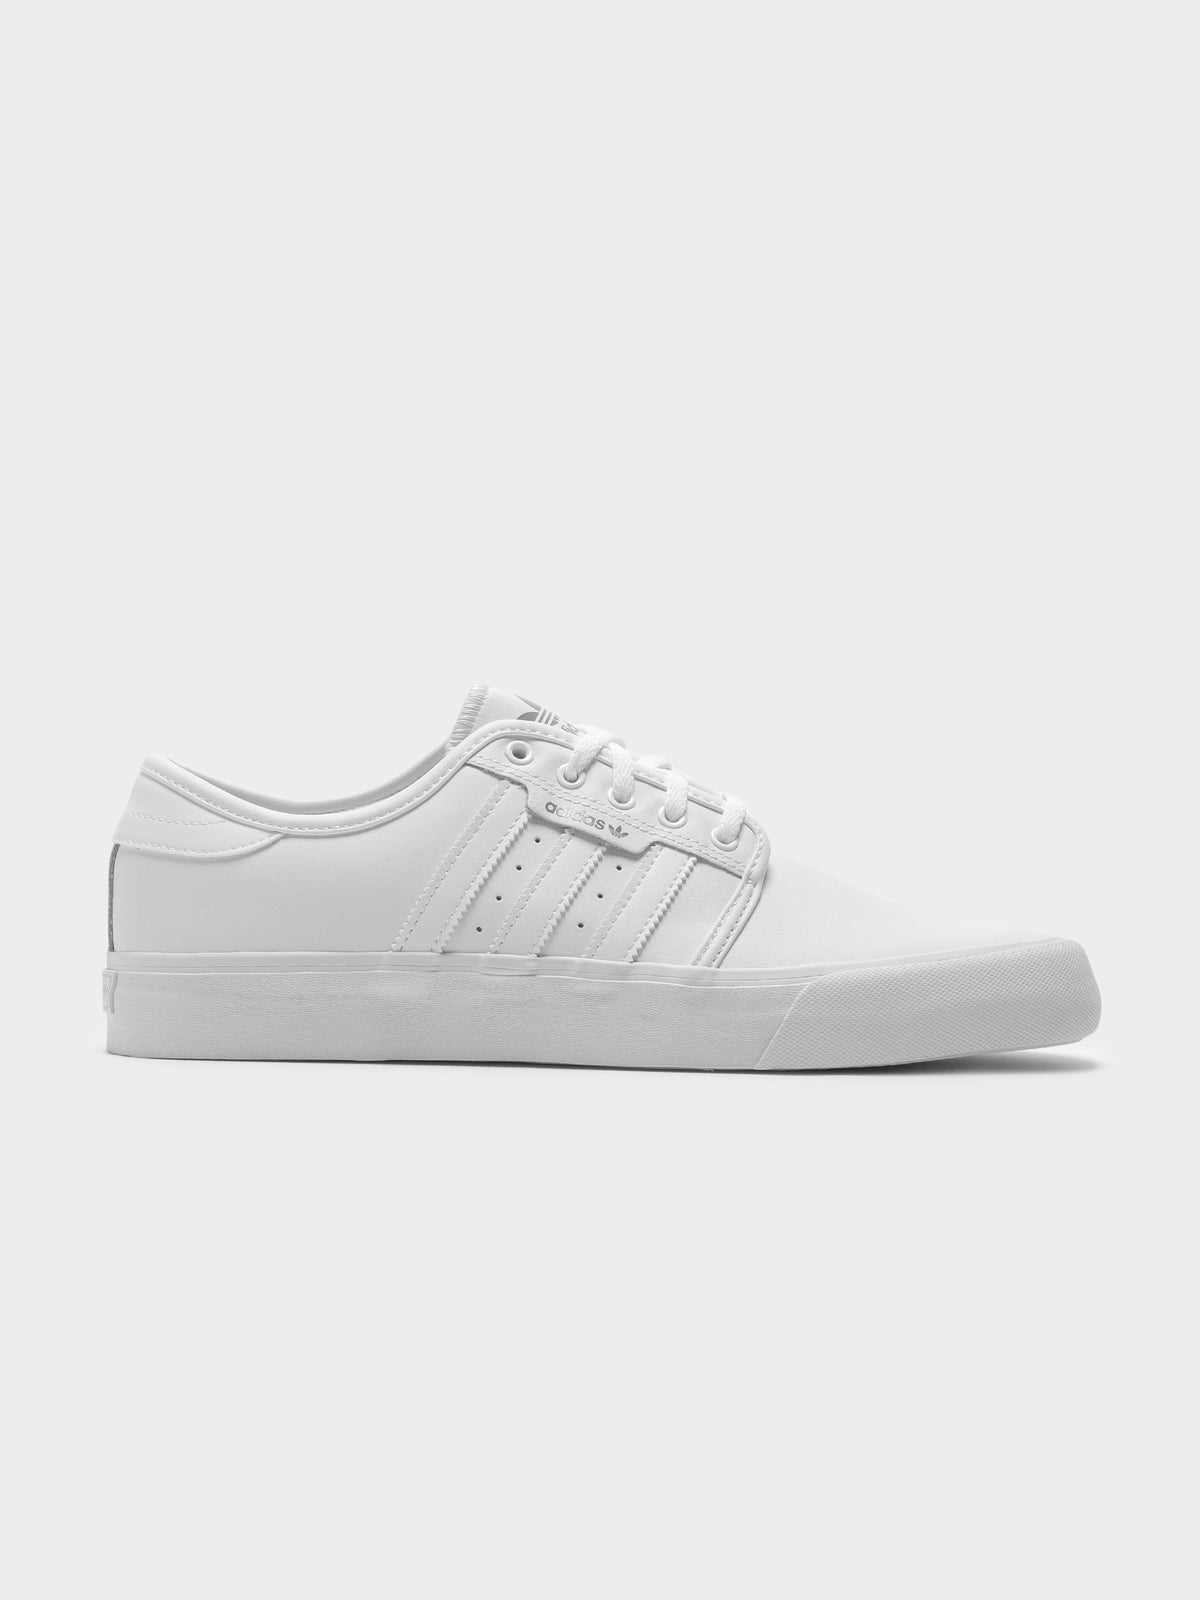 Mens Seeley XT Sneakers in White